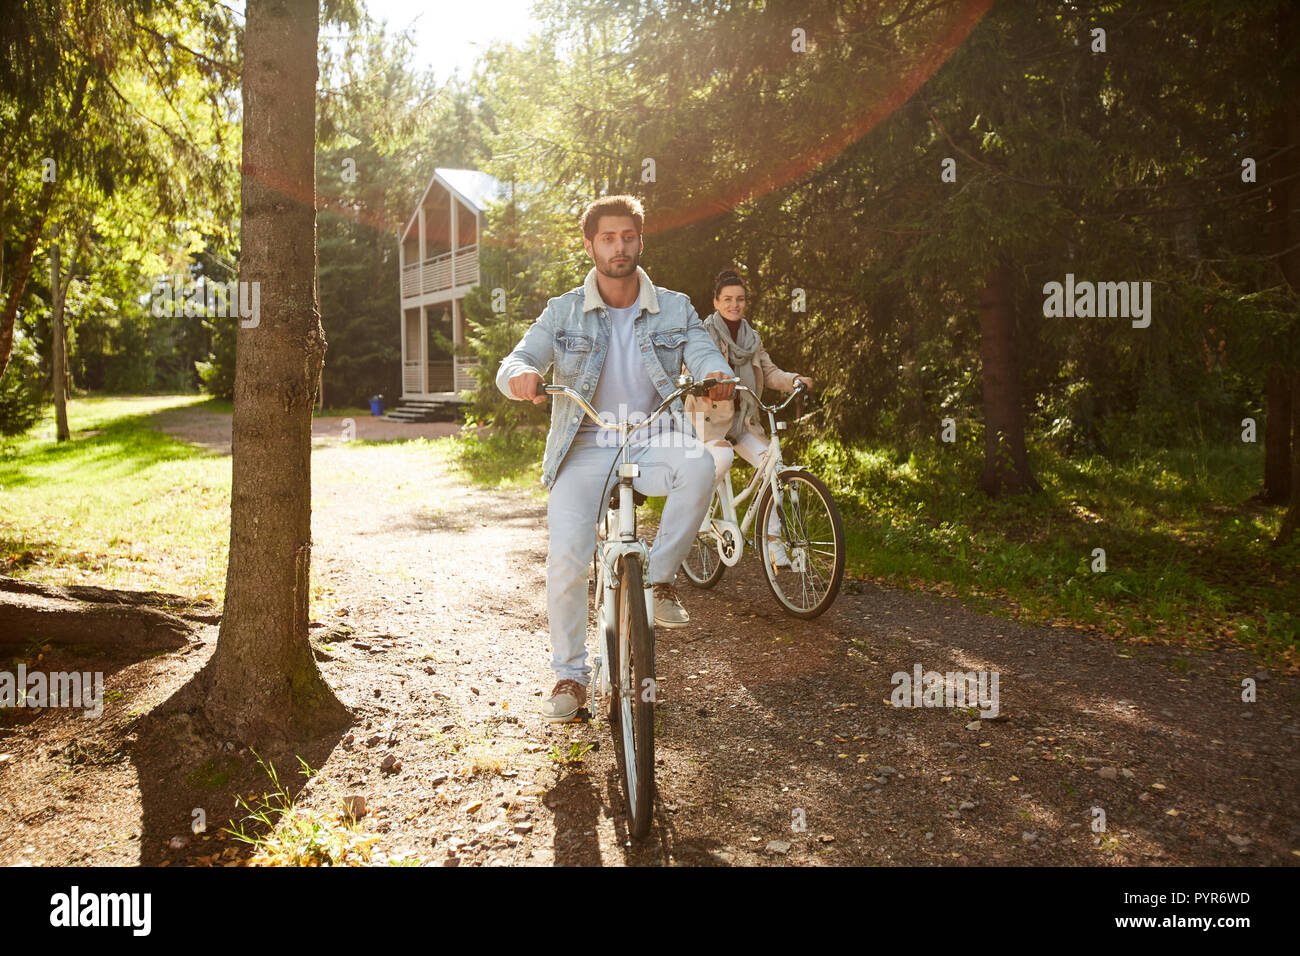 Couple actif riding bikes in forest Banque D'Images